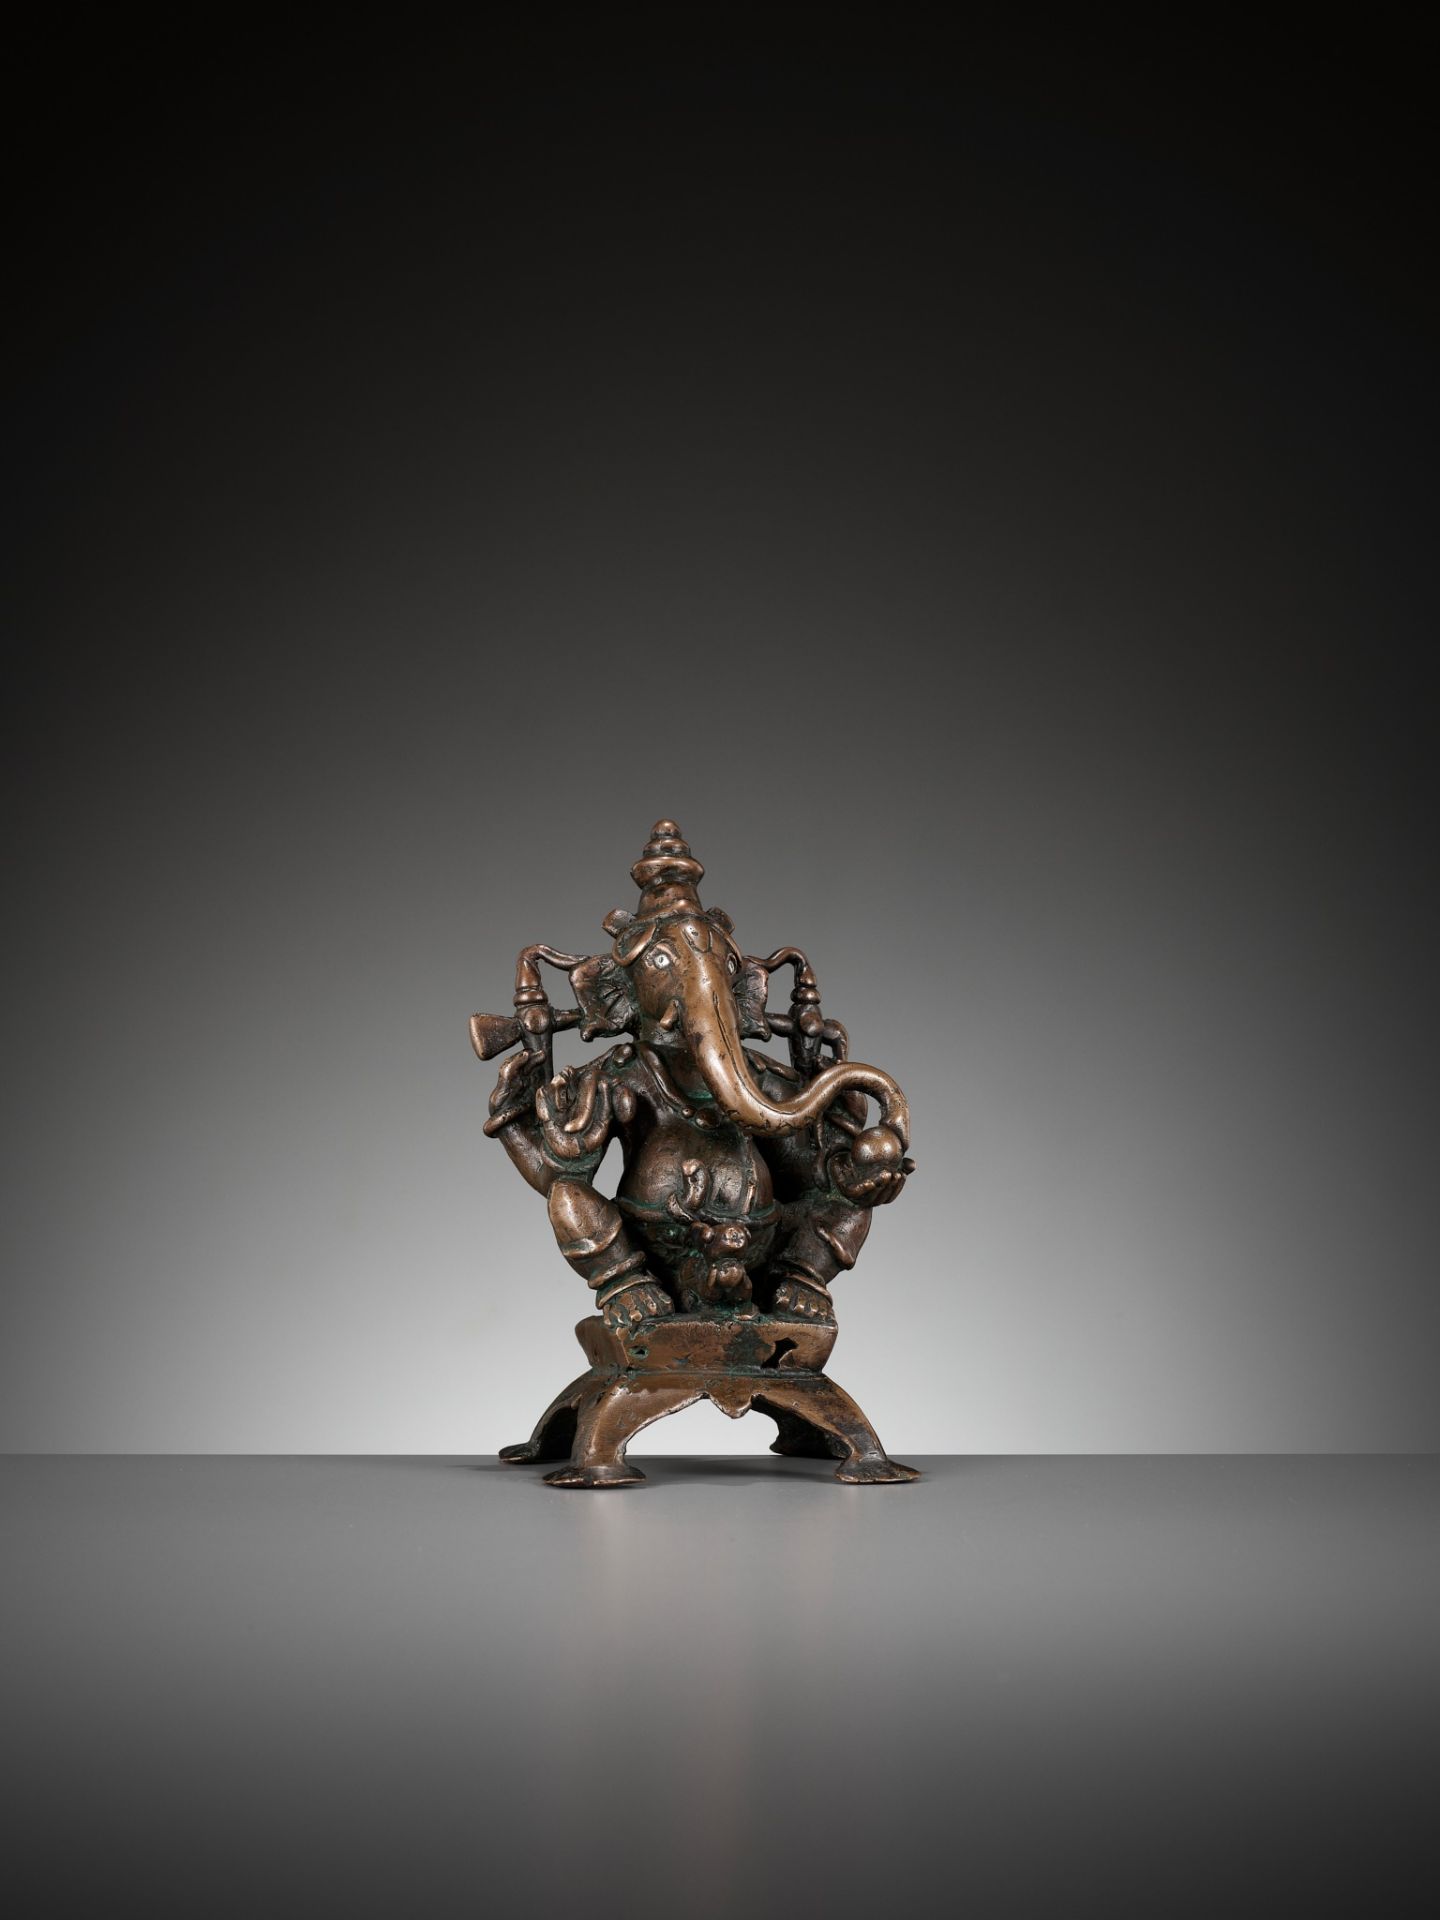 A SILVER-INLAID COPPER ALLOY FIGURE OF GANESHA, SOUTH INDIA, C. 1650-1750 - Image 10 of 12